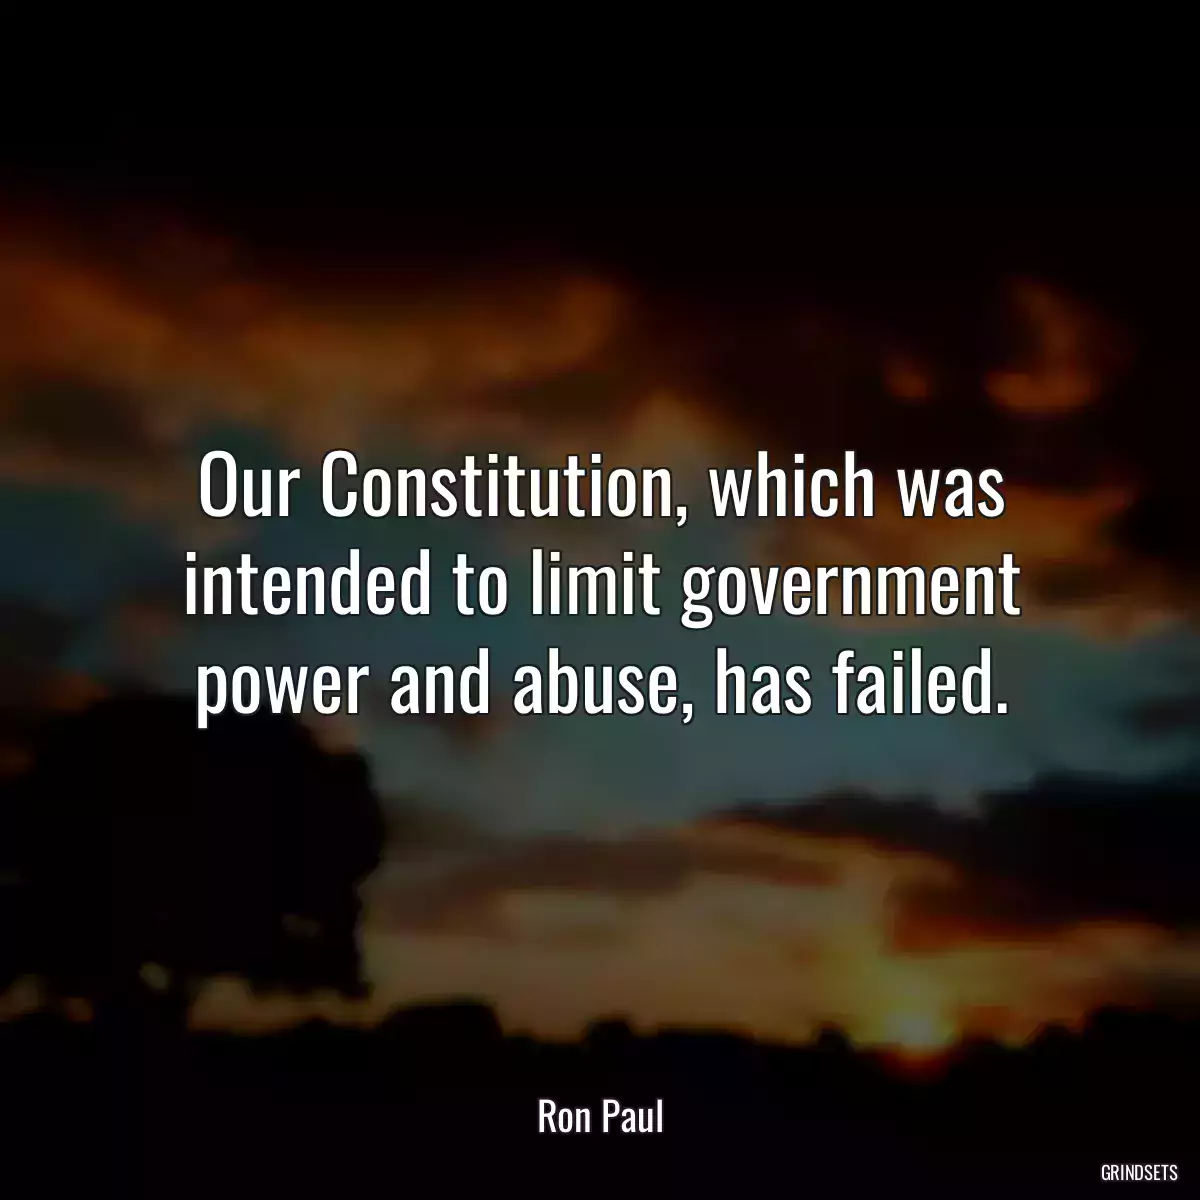 Our Constitution, which was intended to limit government power and abuse, has failed.